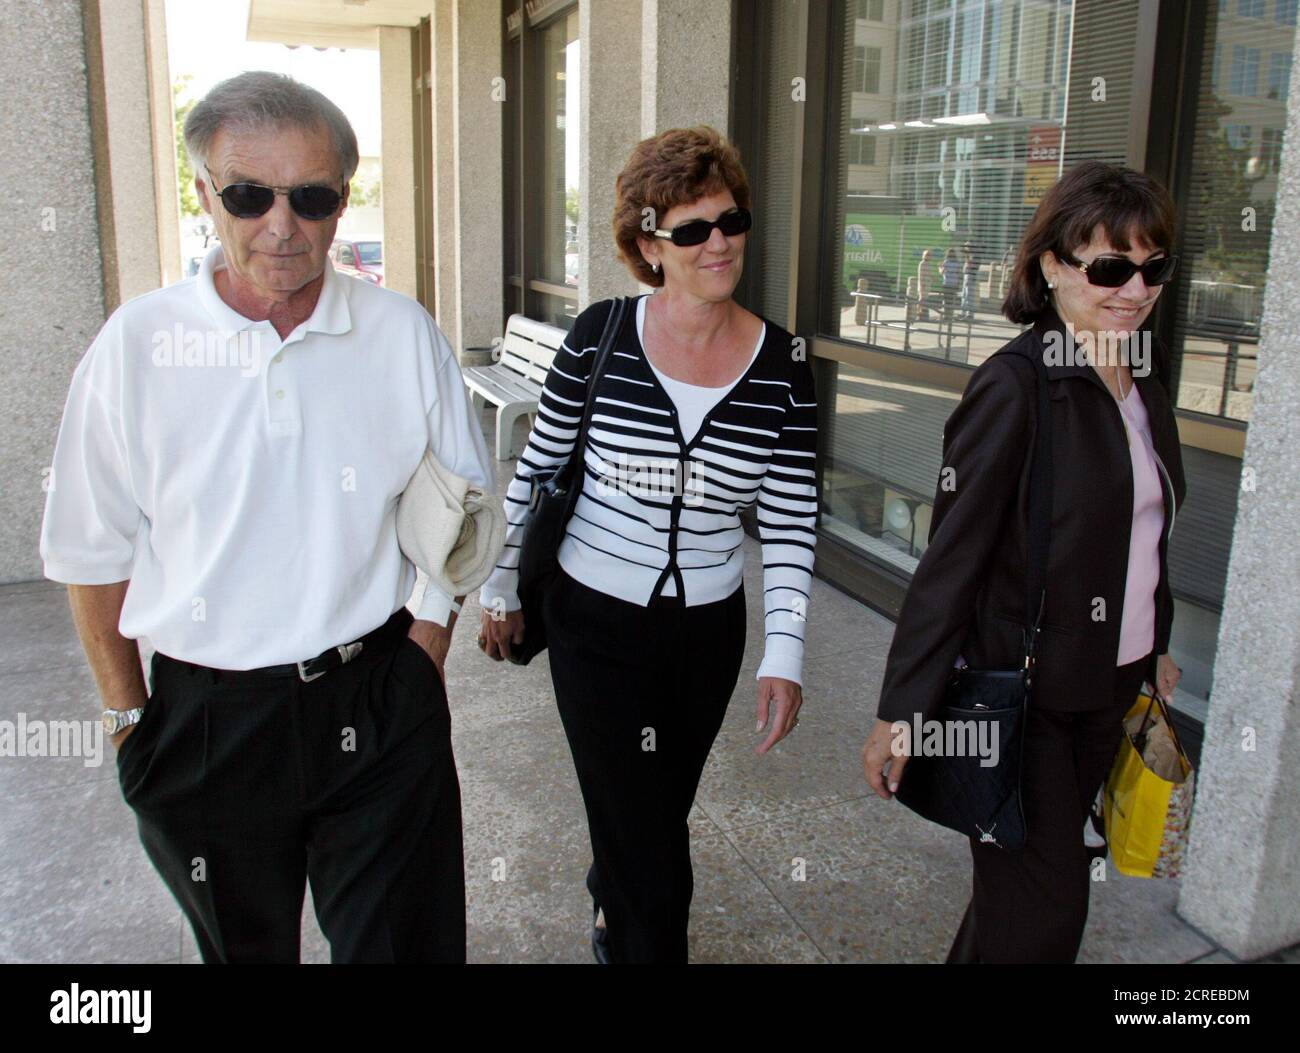 Lee Peterson (L), father, Susan Caudillo (C), sister, and Jackie Peterson, mother, of accused double murderer Scott Peterson arrive for his trial at the San Mateo County Superior Courthouse in Redwood City, California, September 7, 2004. Scott Peterson is charged with the murders of his wife Laci and the couple's unborn son Connor. REUTERS/Lou Dematteis/Pool REUTERS  LD Stock Photo